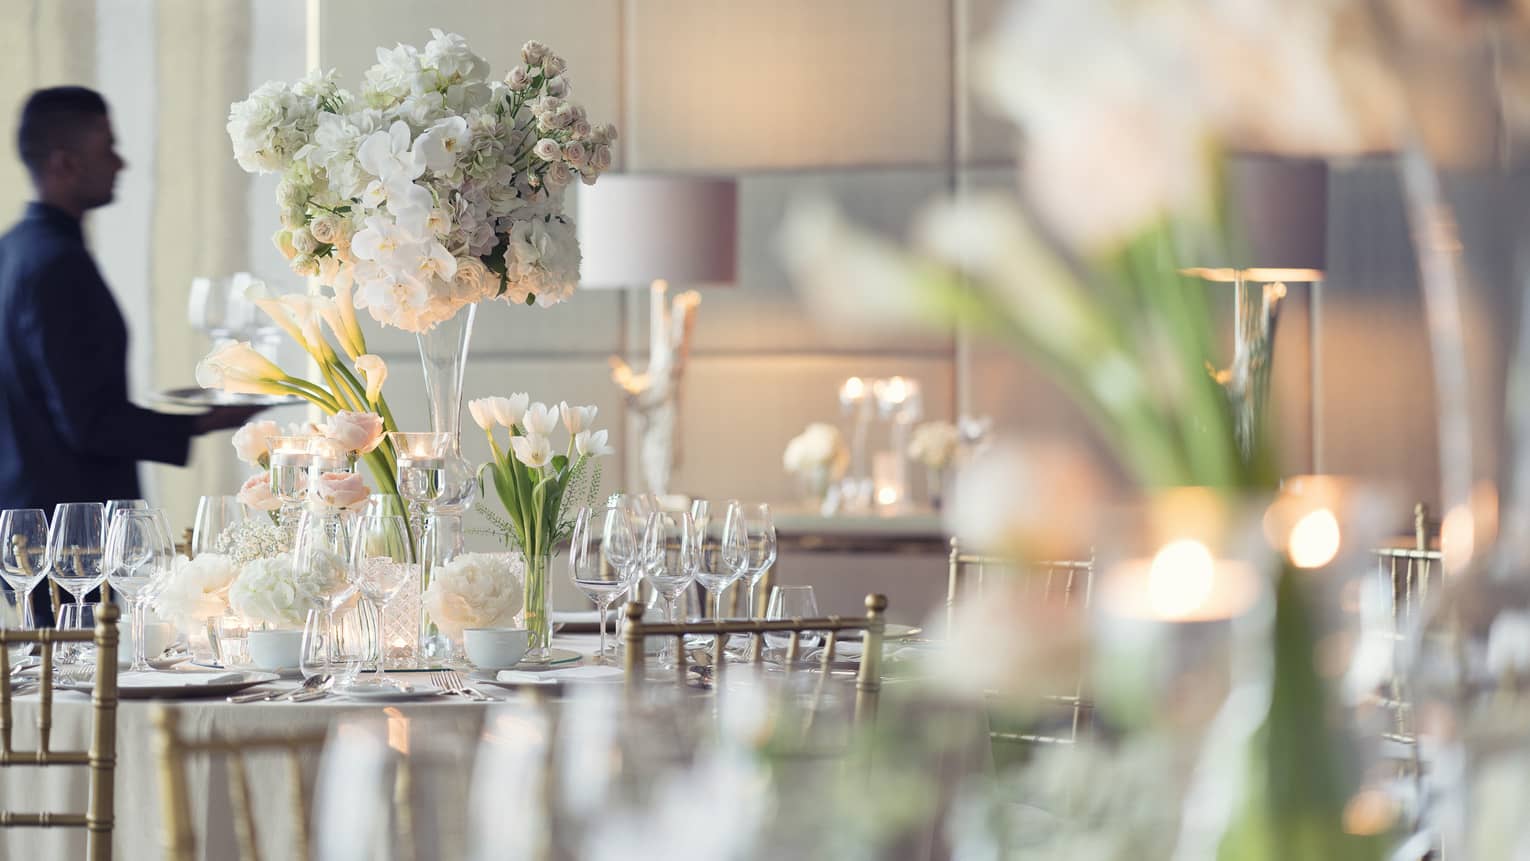 A four seasons staff member sets the tables of a wedding reception with white tall florals, clear glassware, white plates and silver tableware